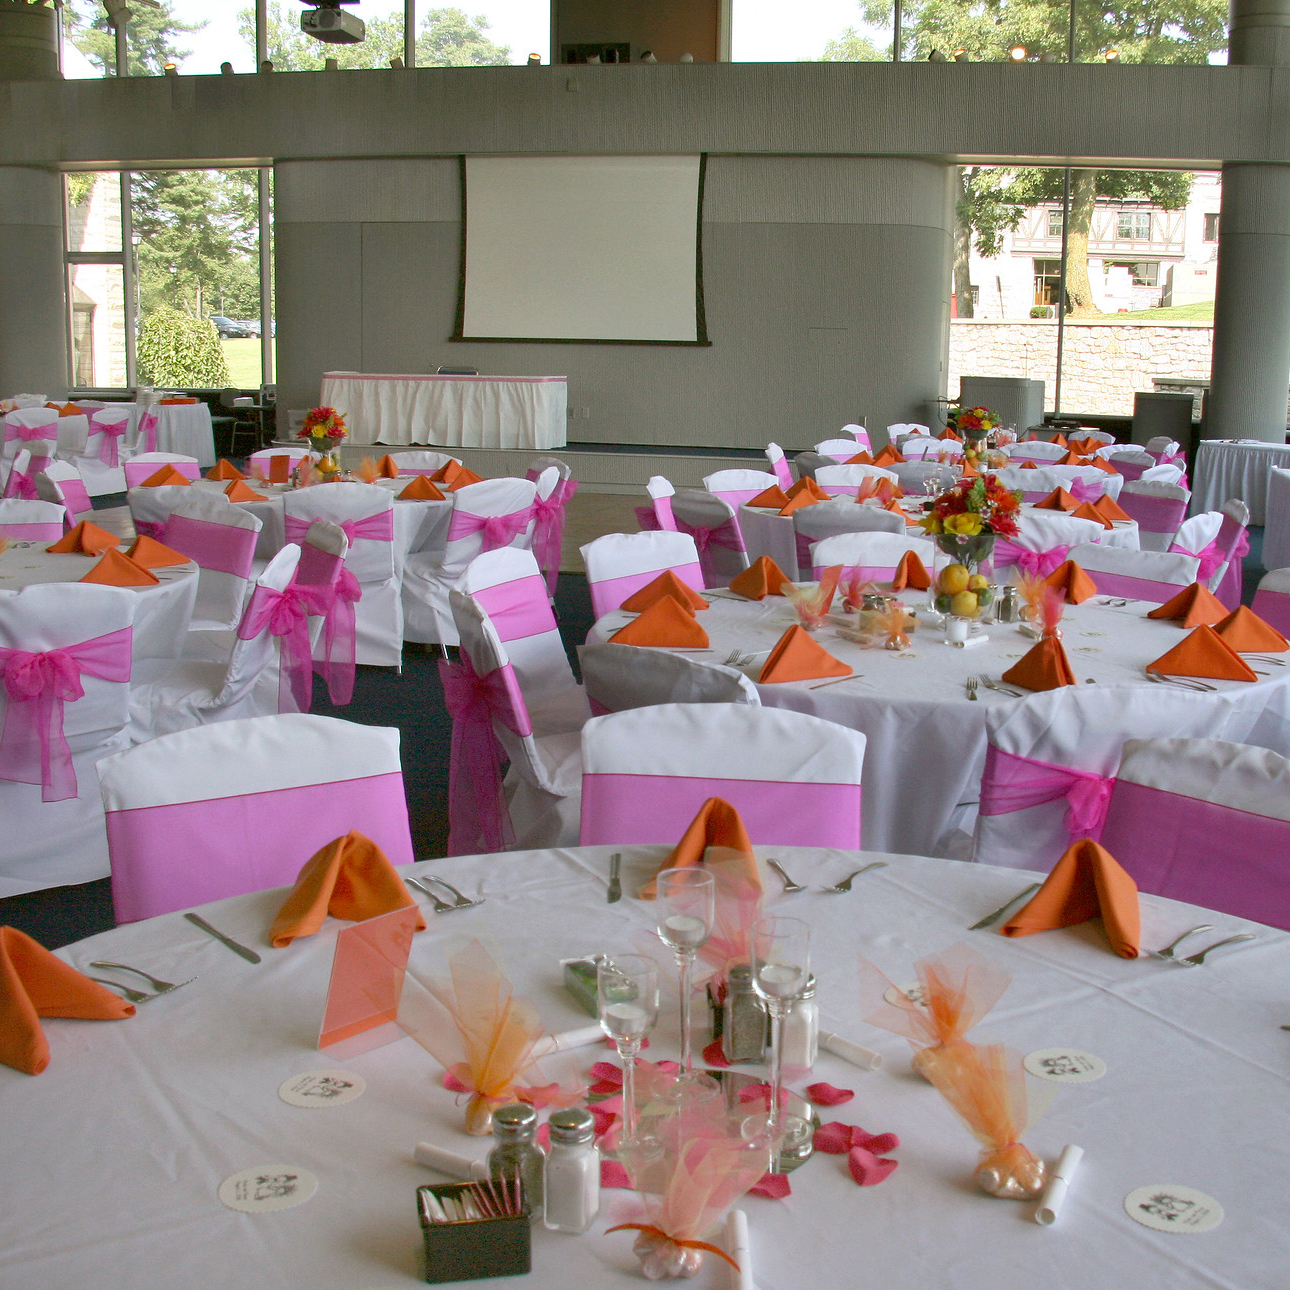 Facilities Rental and Catering